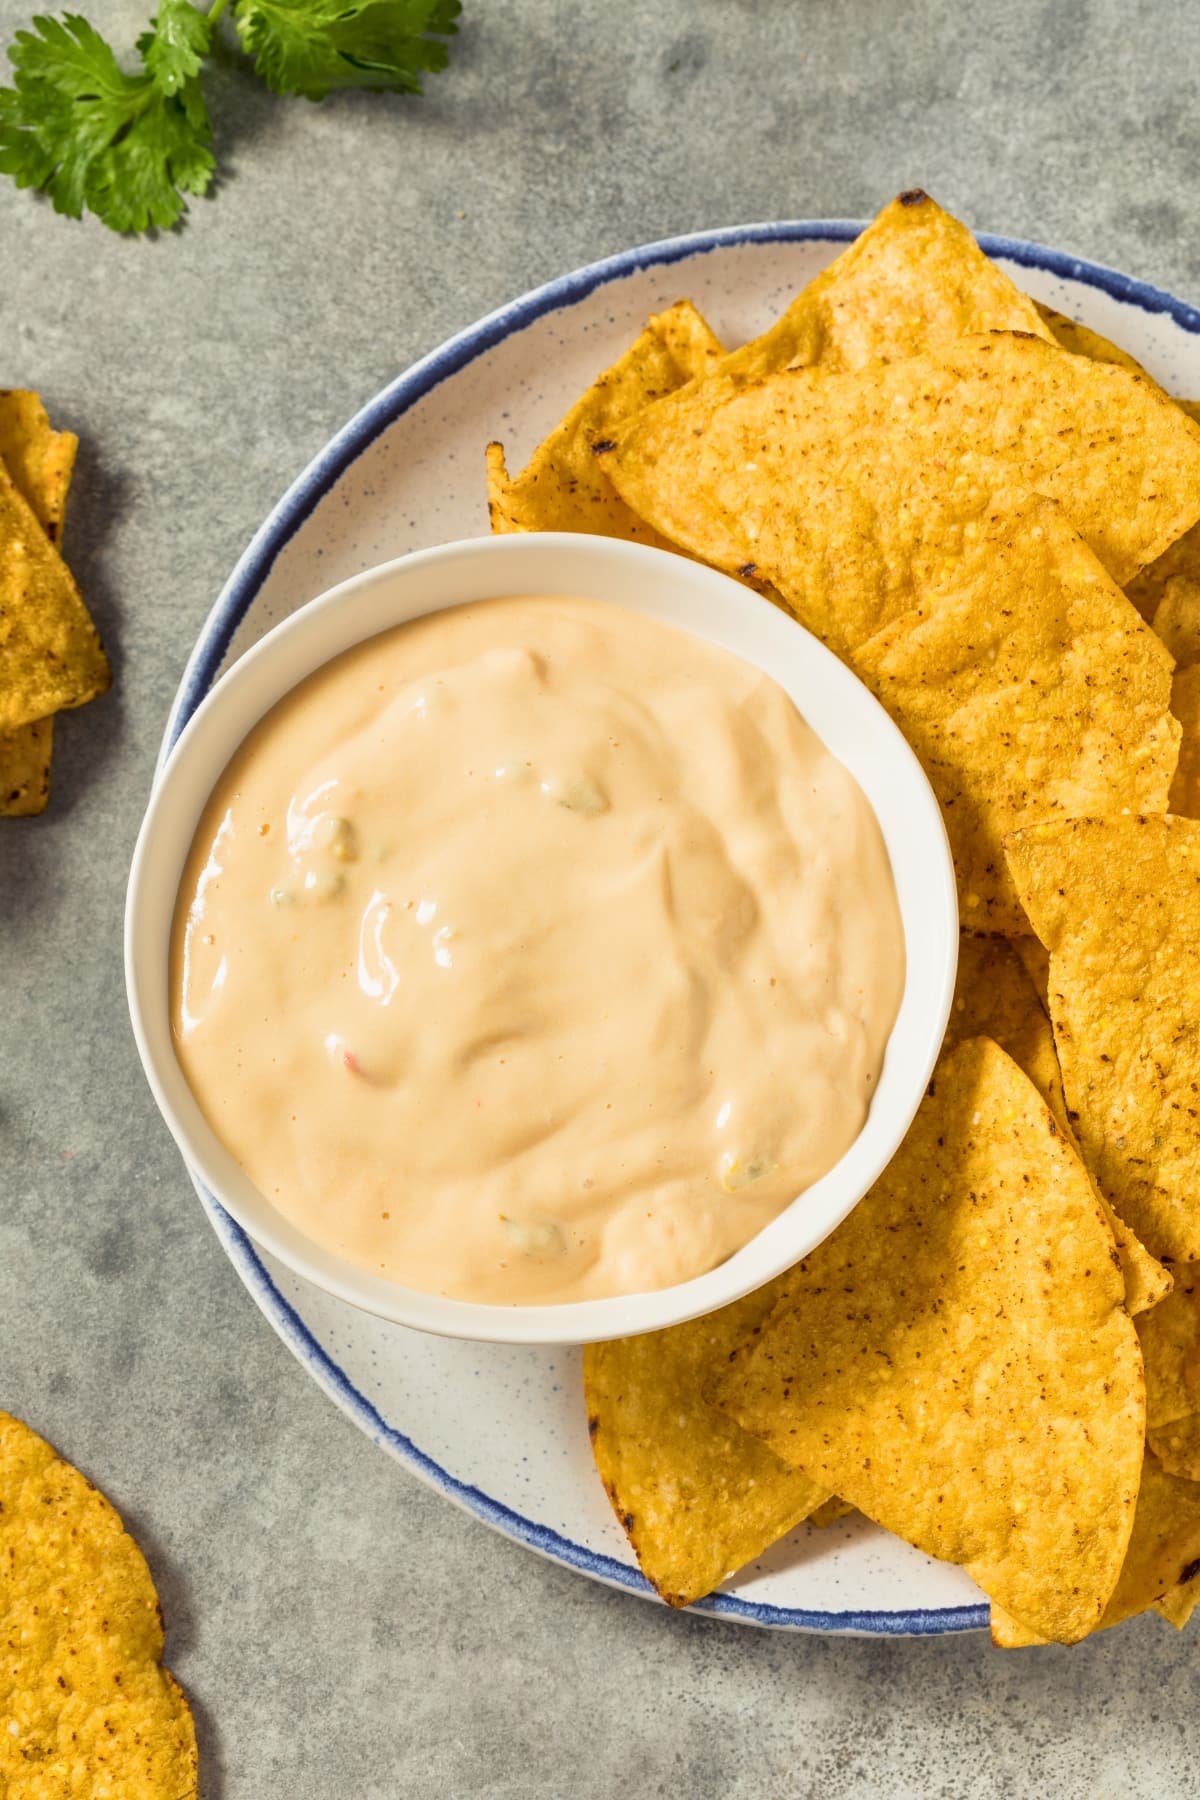 Tortilla chips in a white plate served with queso dip.